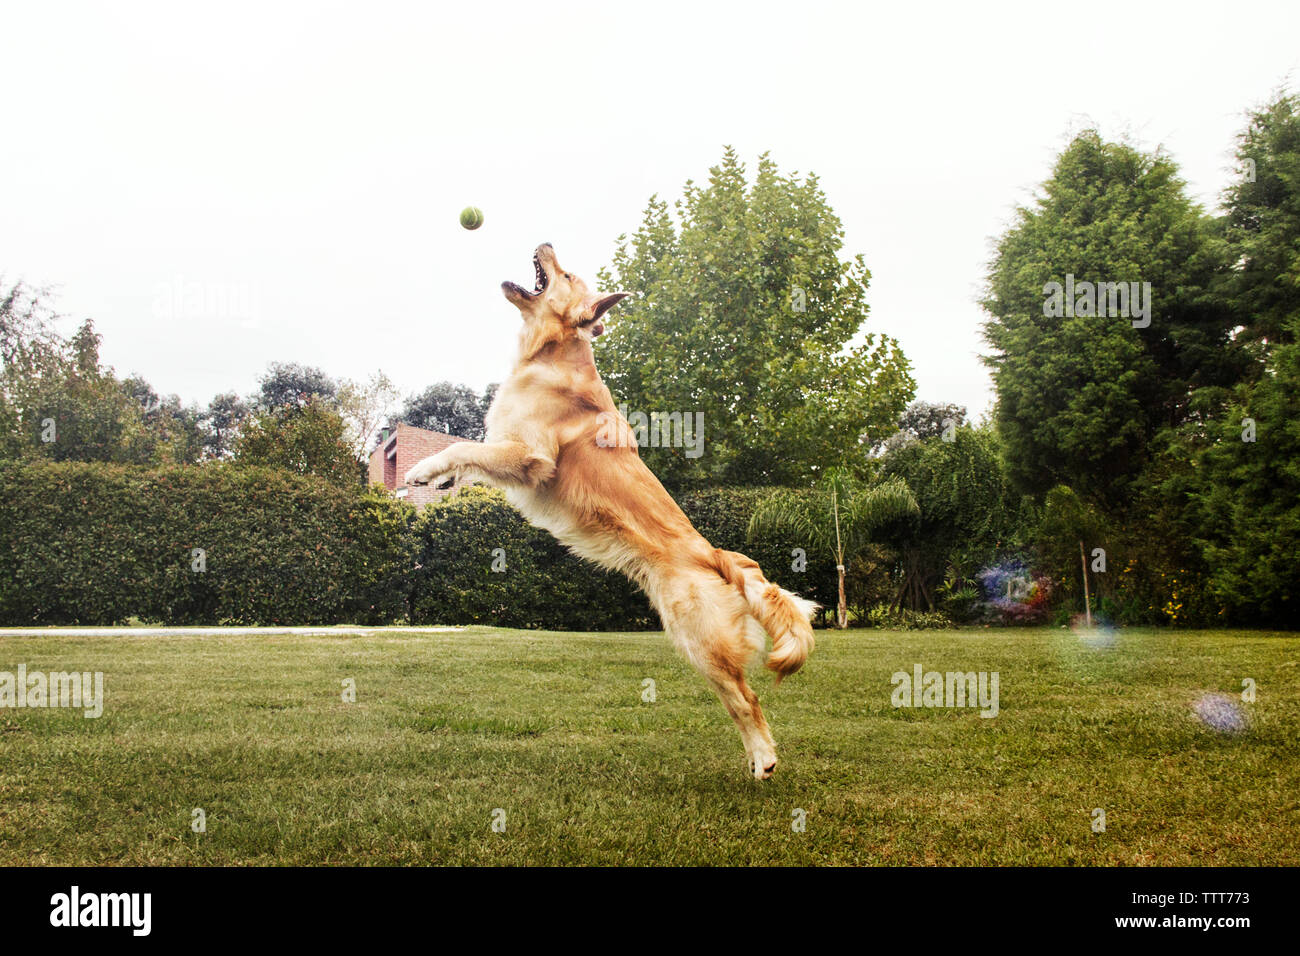 Golden Retriever Playing with ball on grassy field at park Banque D'Images